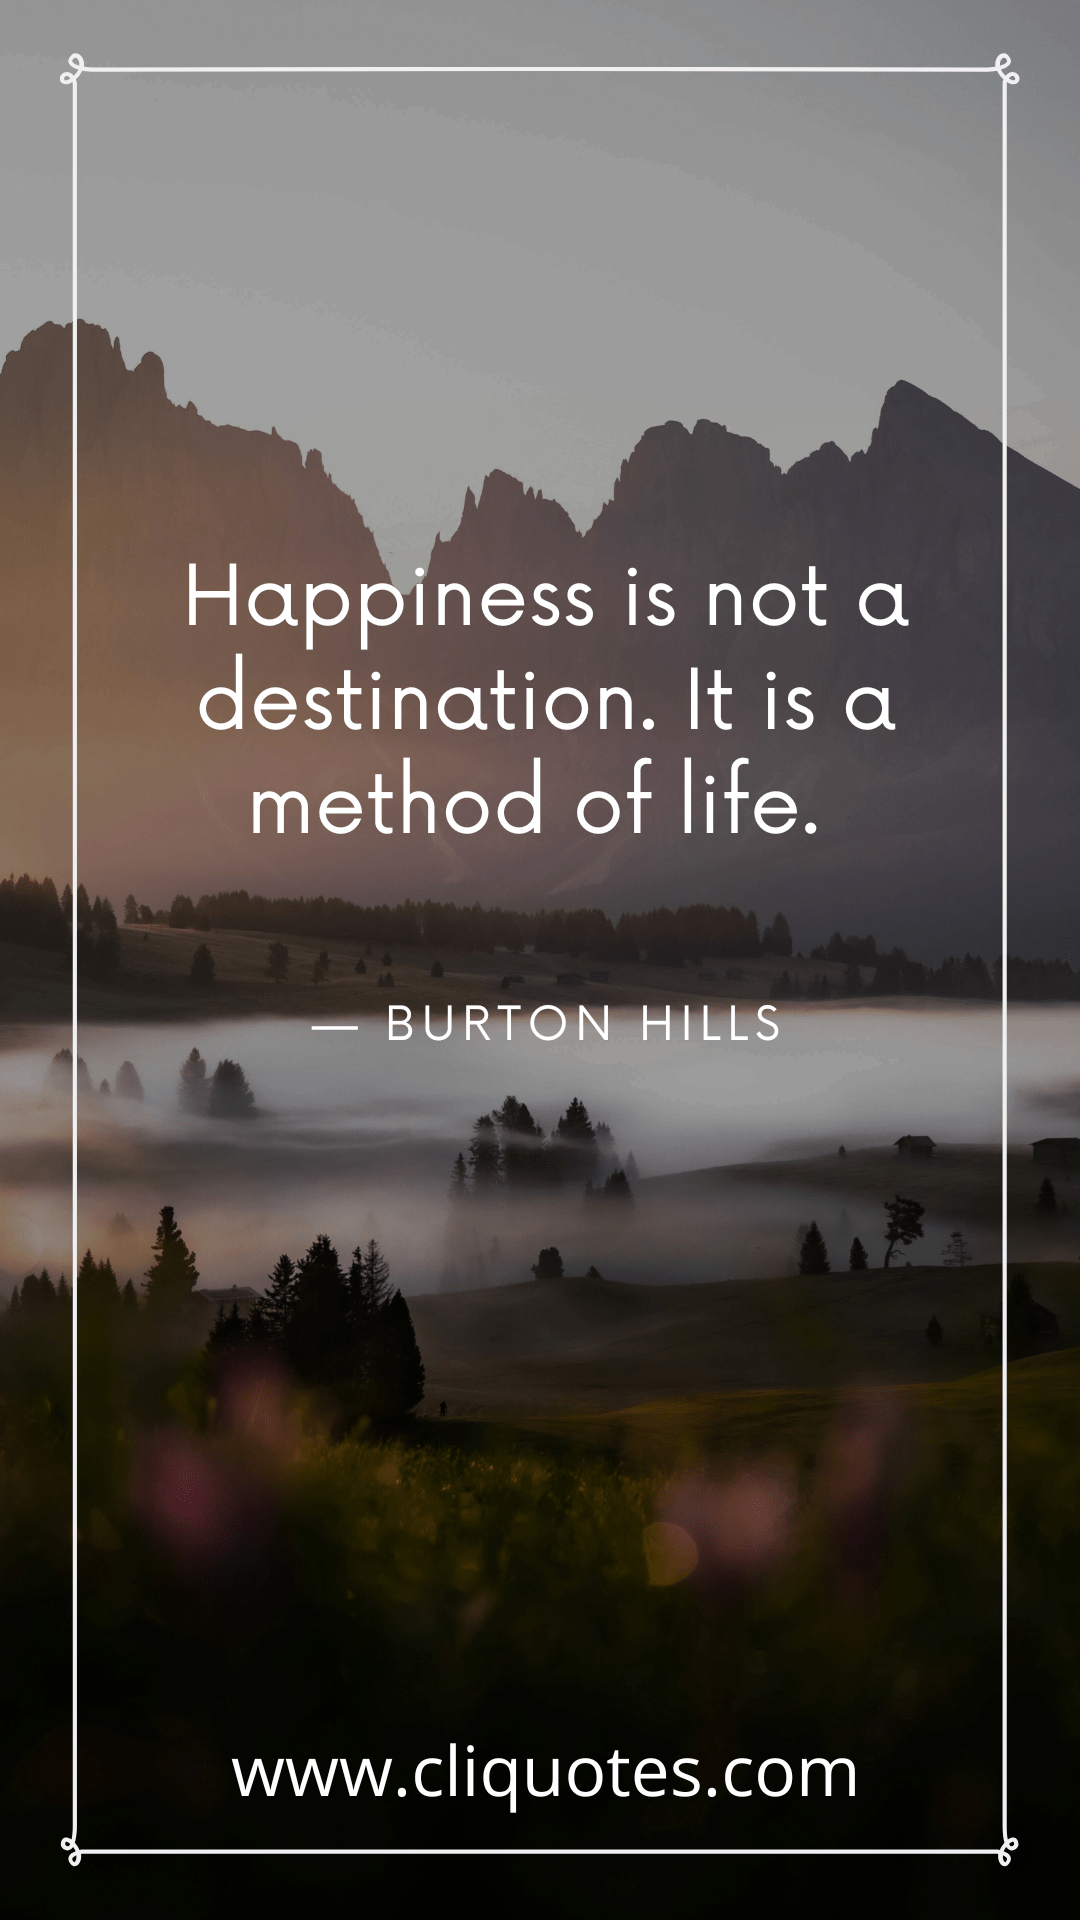 Happiness is not a destination. It is a method of life. — BURTON HILLS